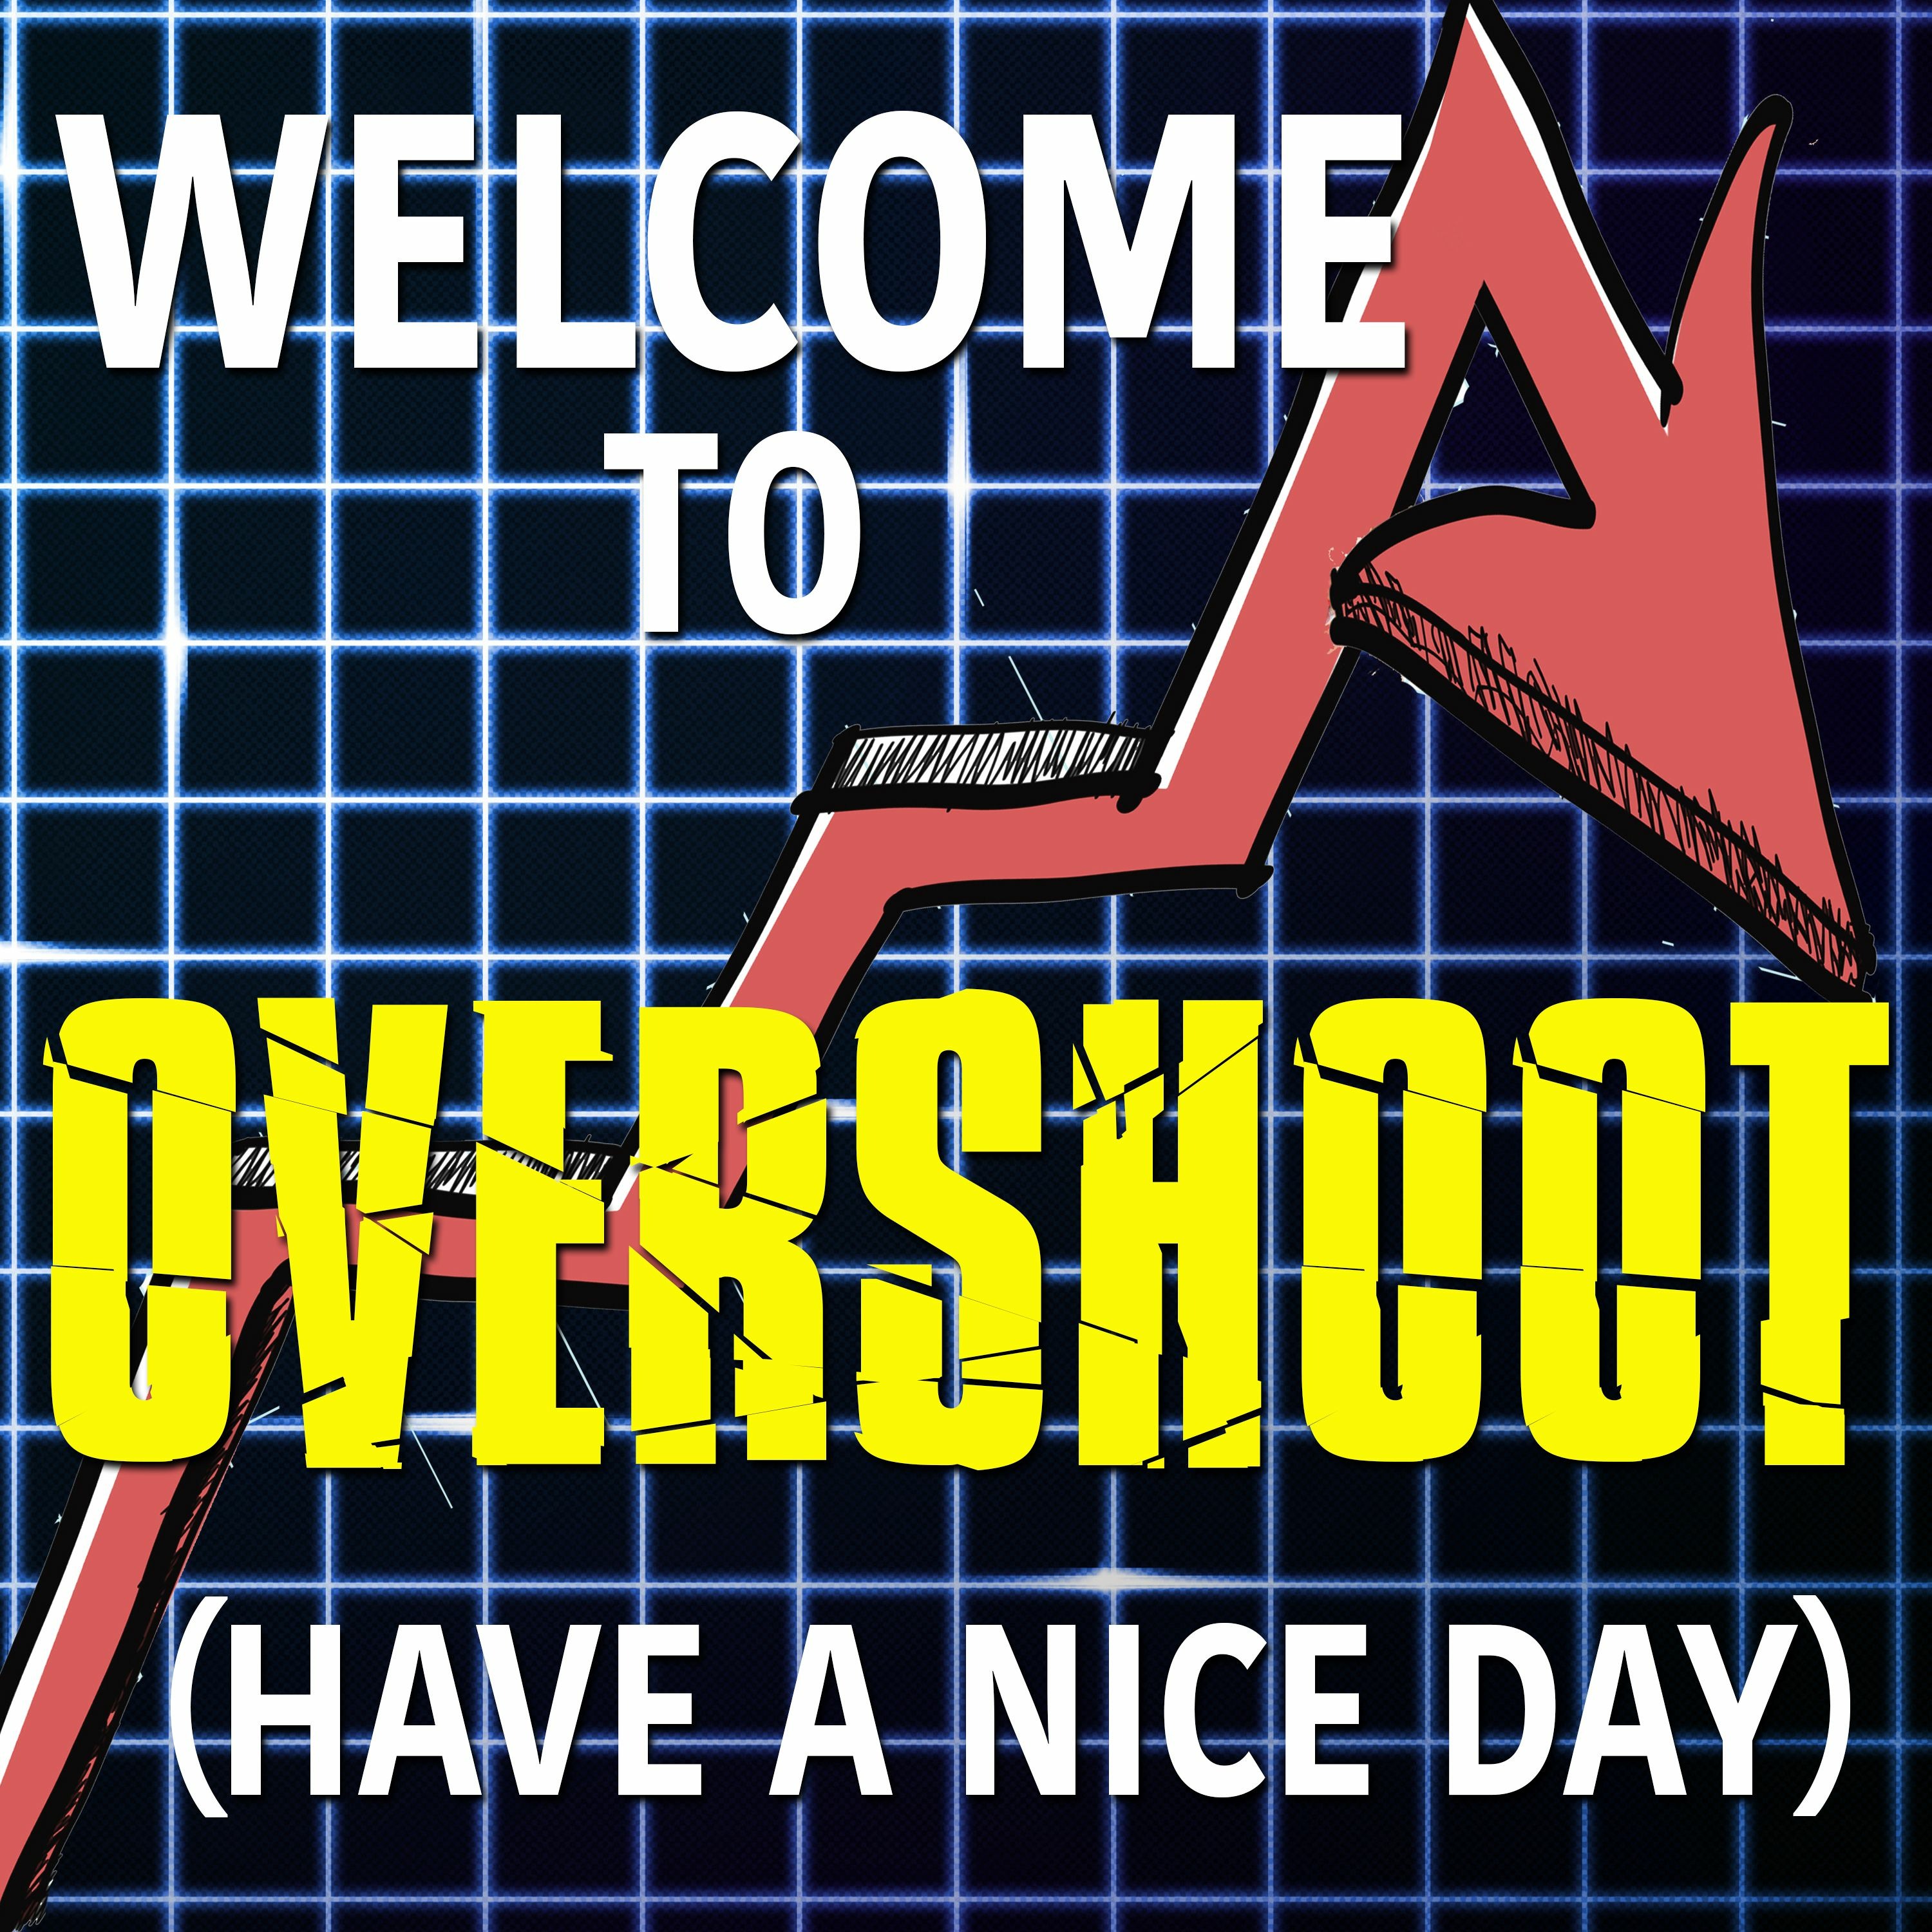 Welcome to Overshoot: Have a Nice Day